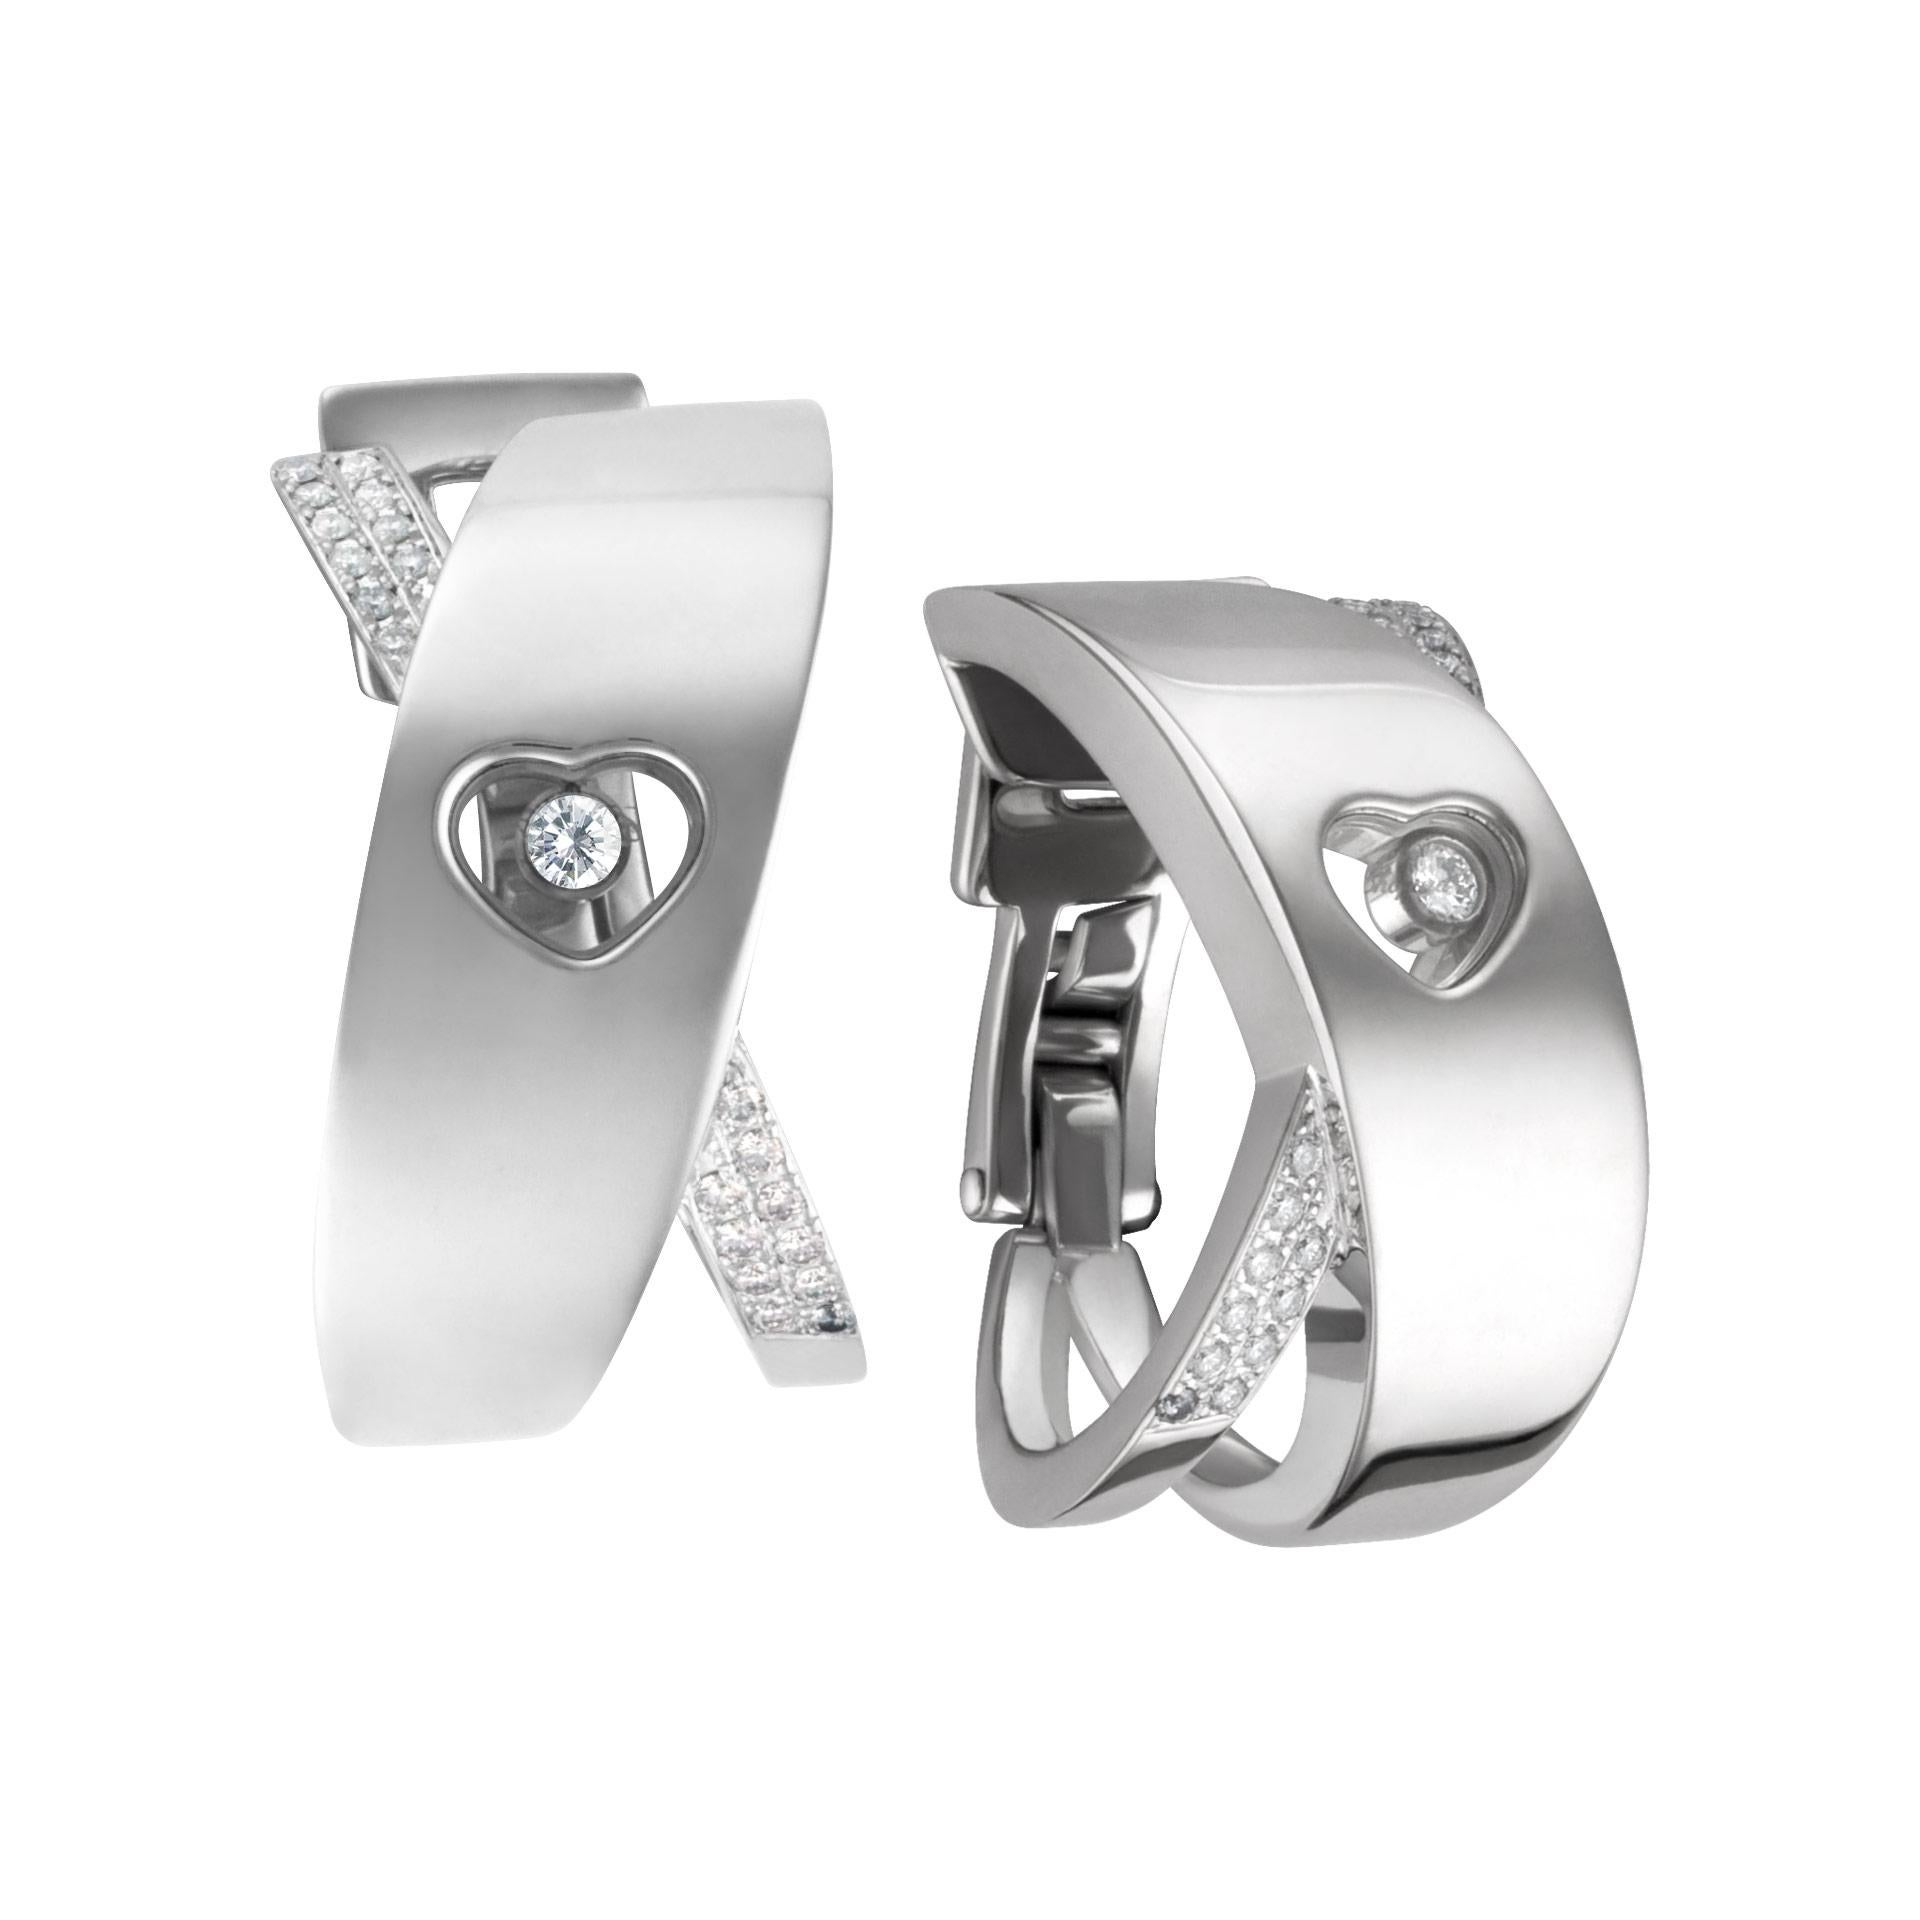 Large Chopard Happy diamond heart hoop earrings with floating diamond in 18k white gold. Hanging length is 0.95